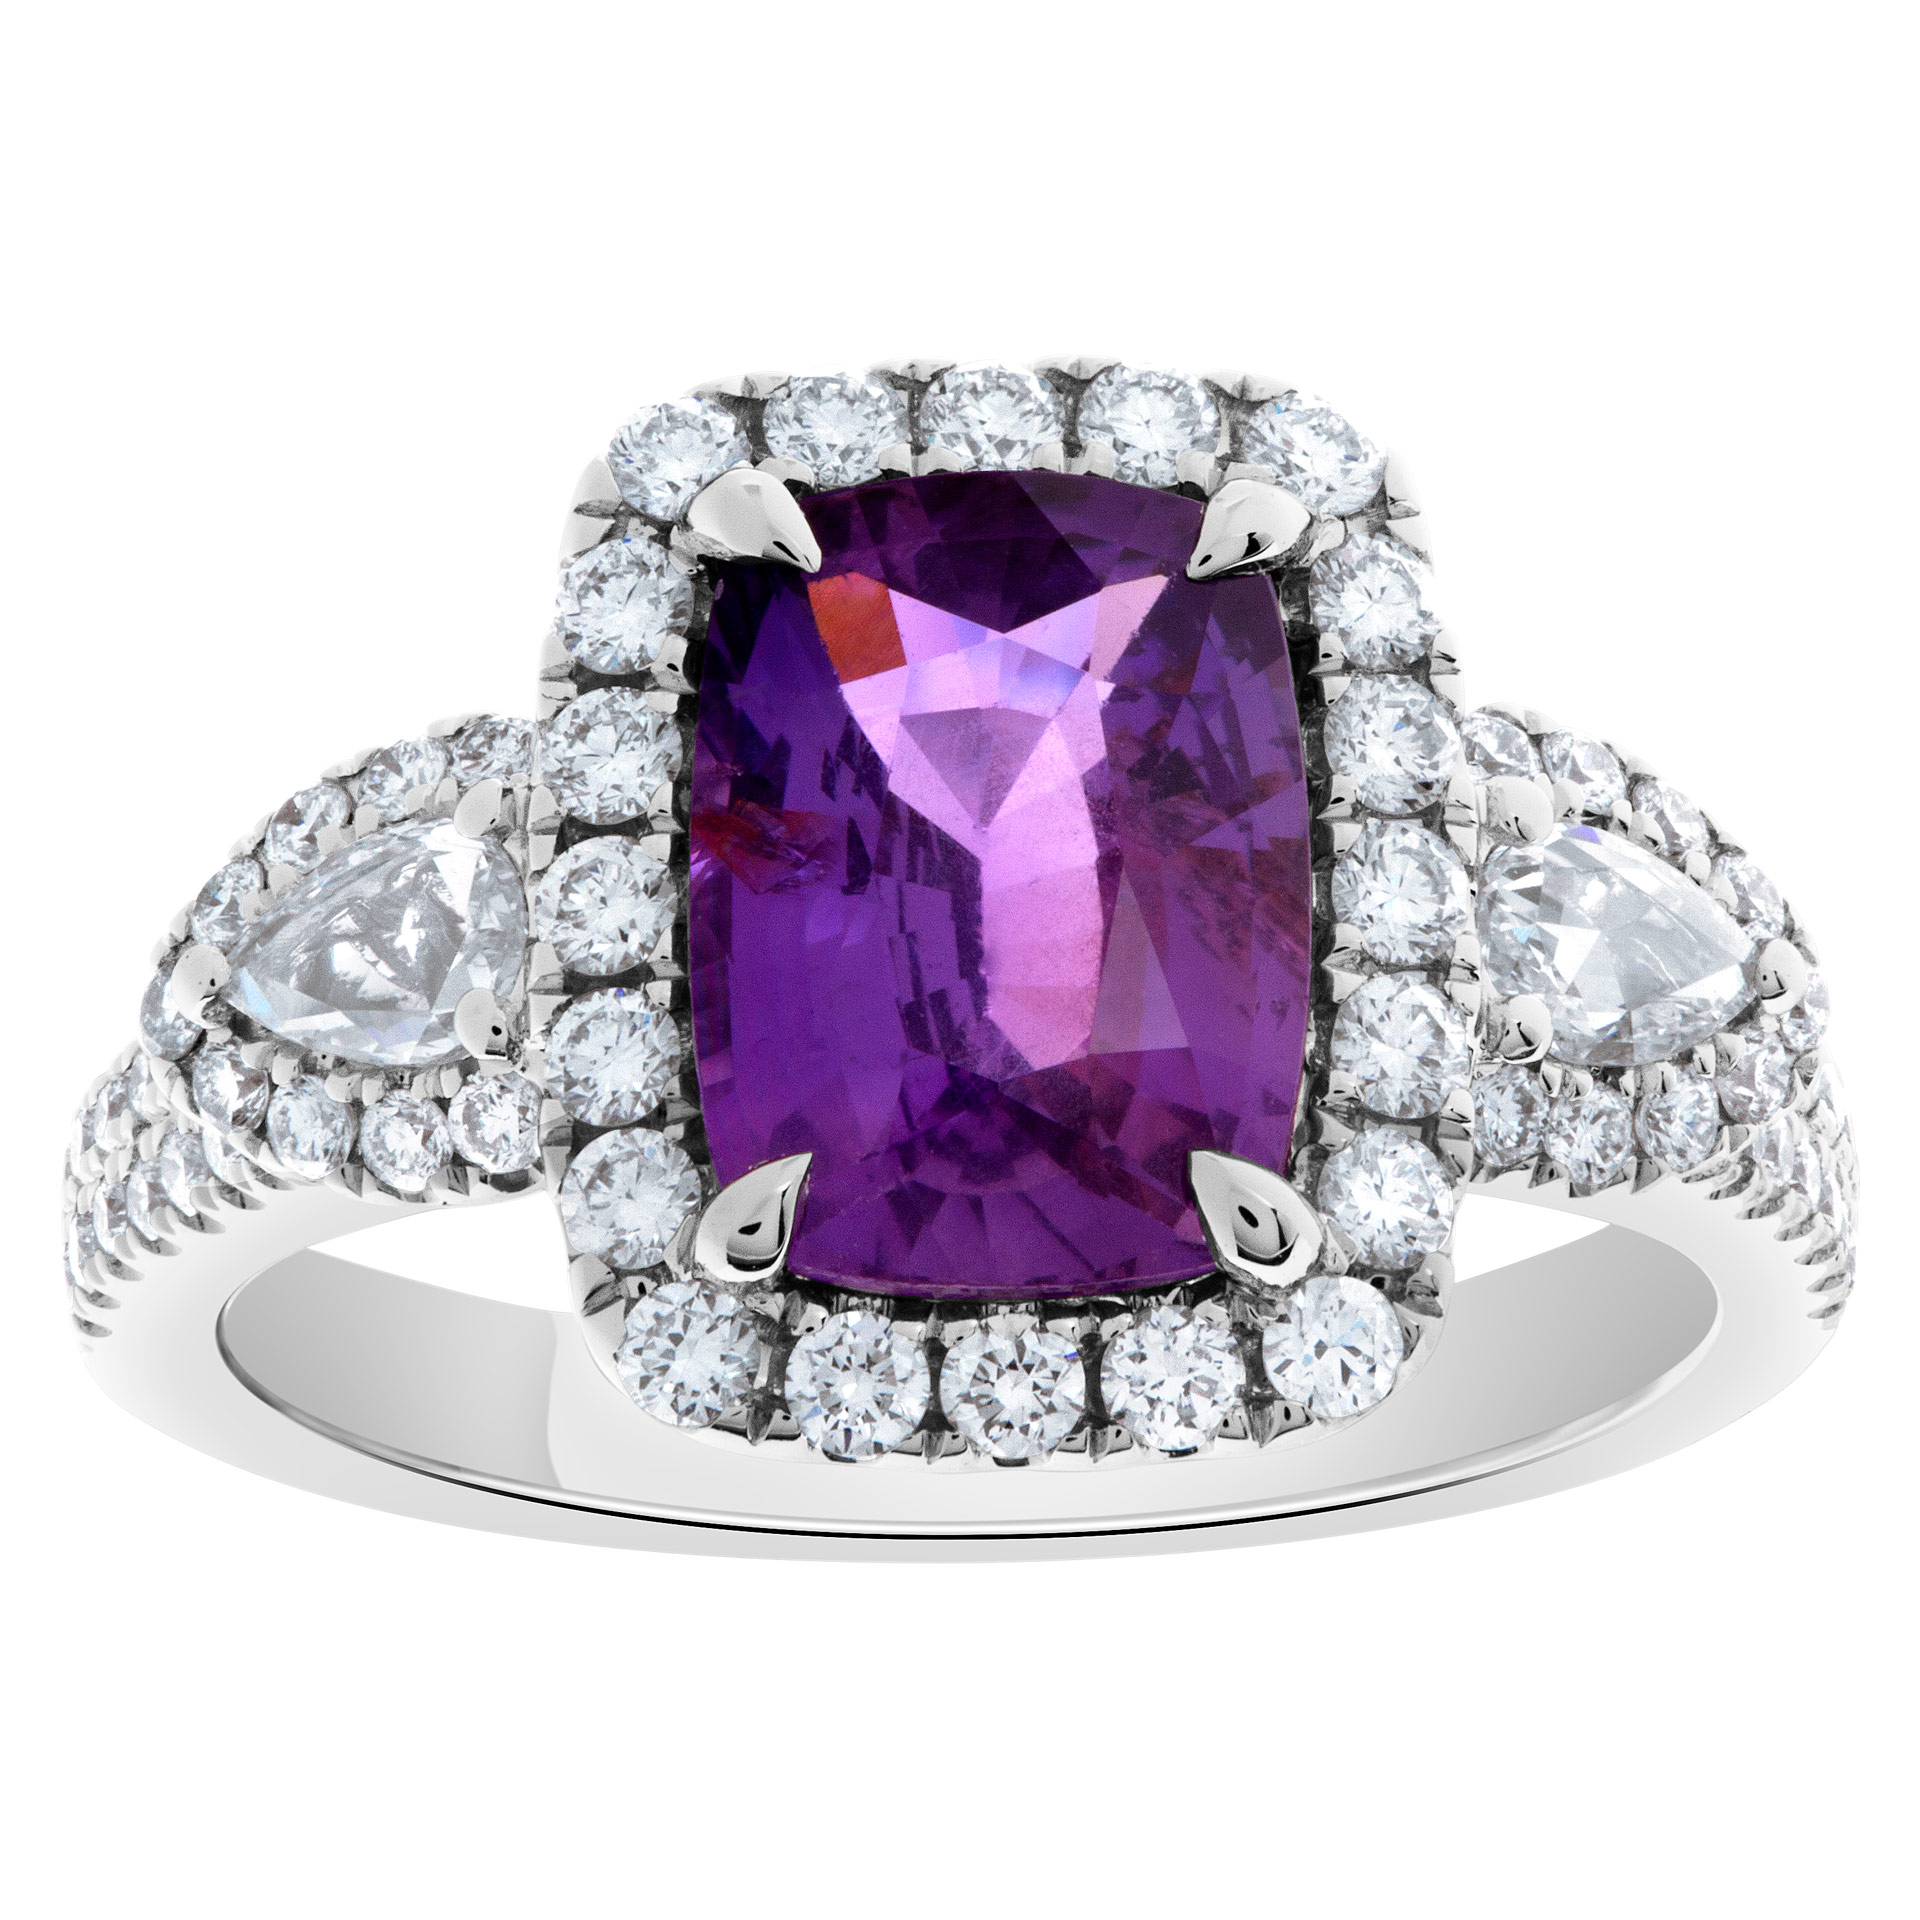 Cushion cut natural purple sapphire and diamond ring set in 18K white gold.